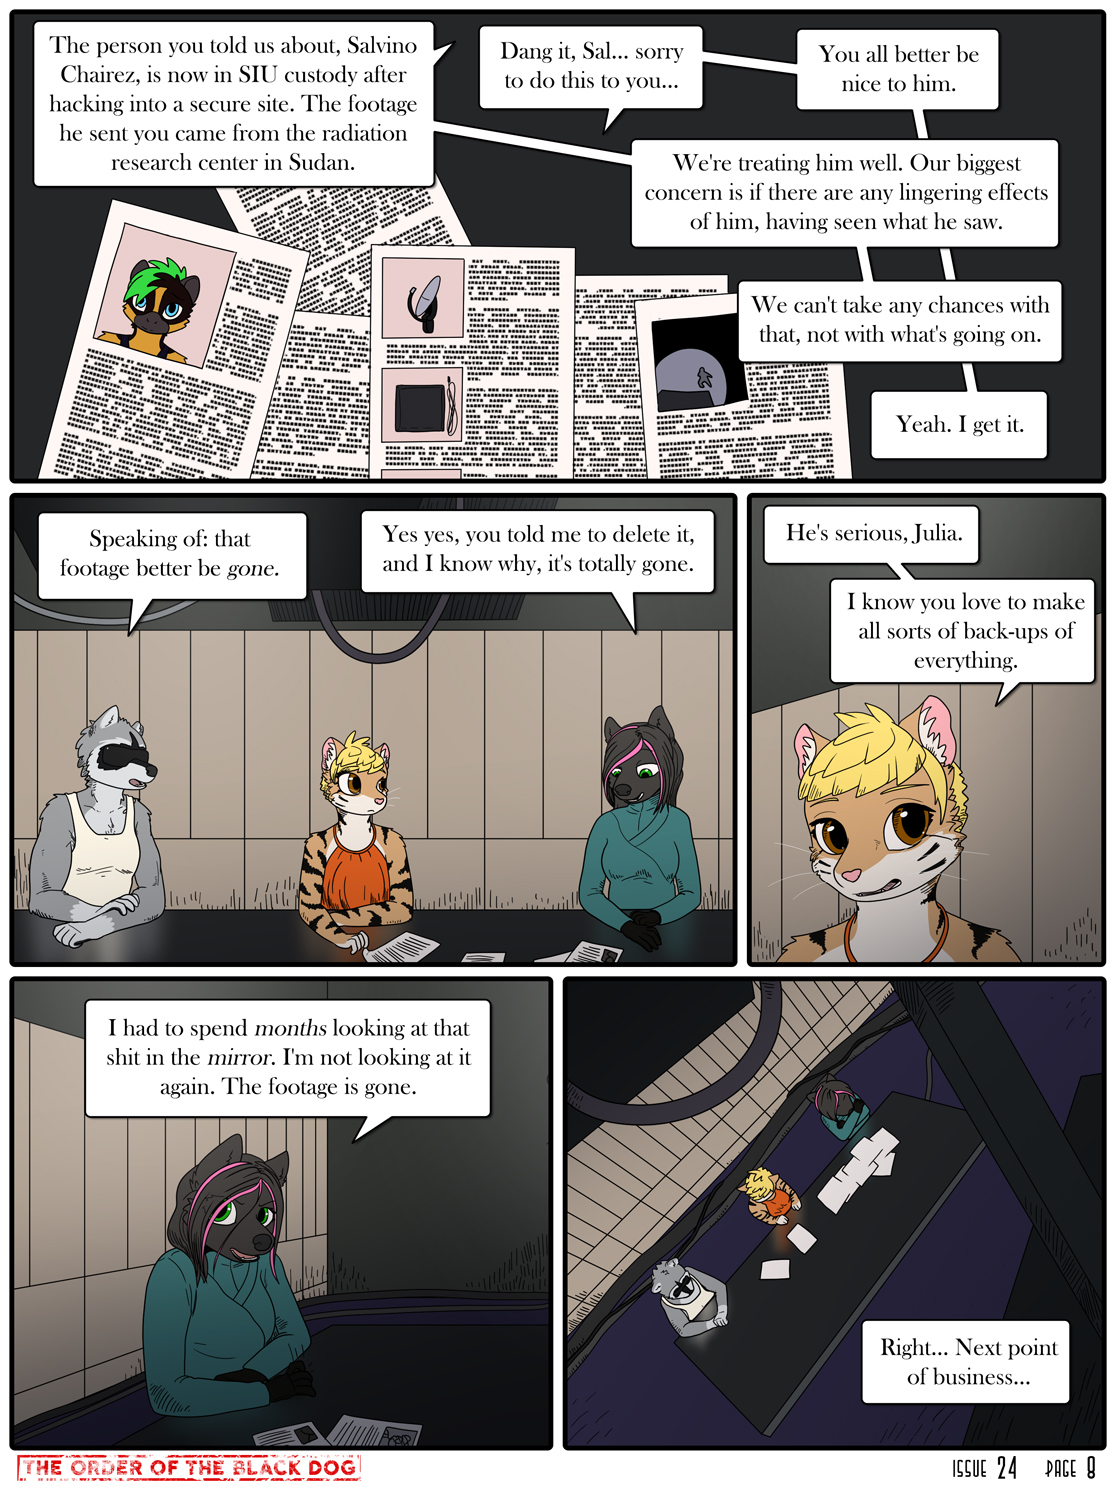 Issue 24, Page 8